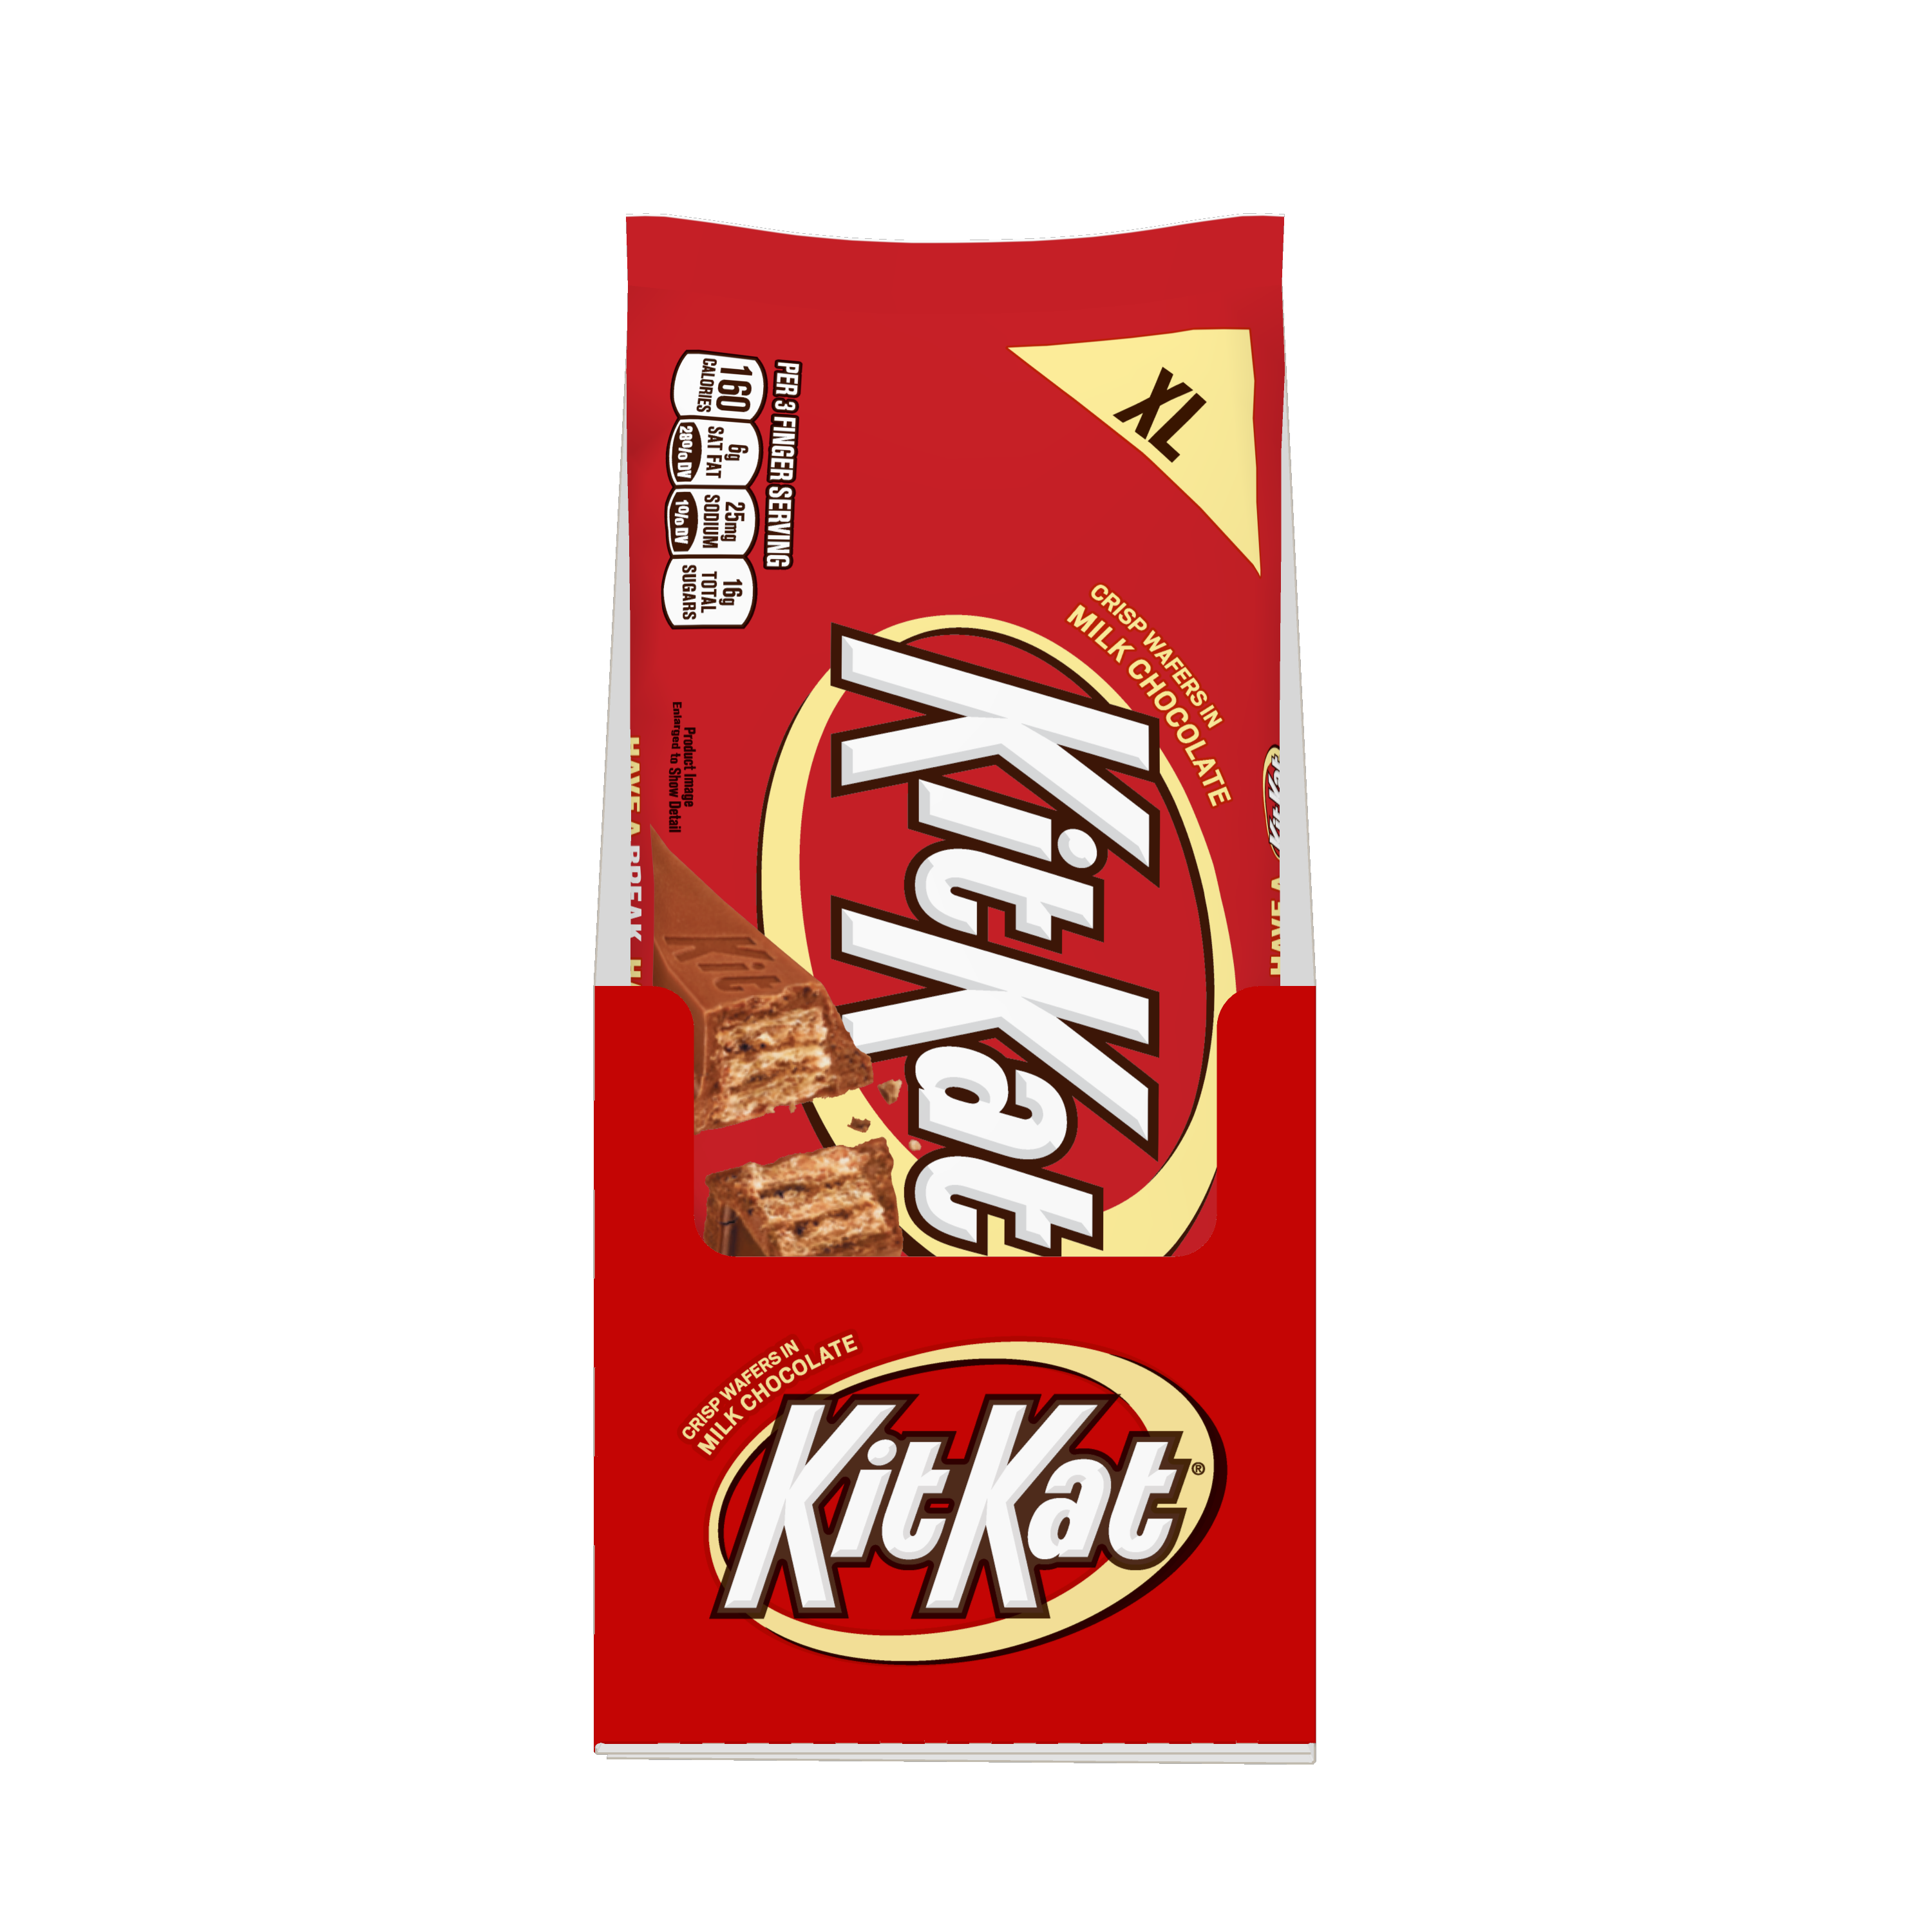 KIT KAT® Milk Chocolate XL Candy Bars, 4.5 oz, 12 pack - Front of Package